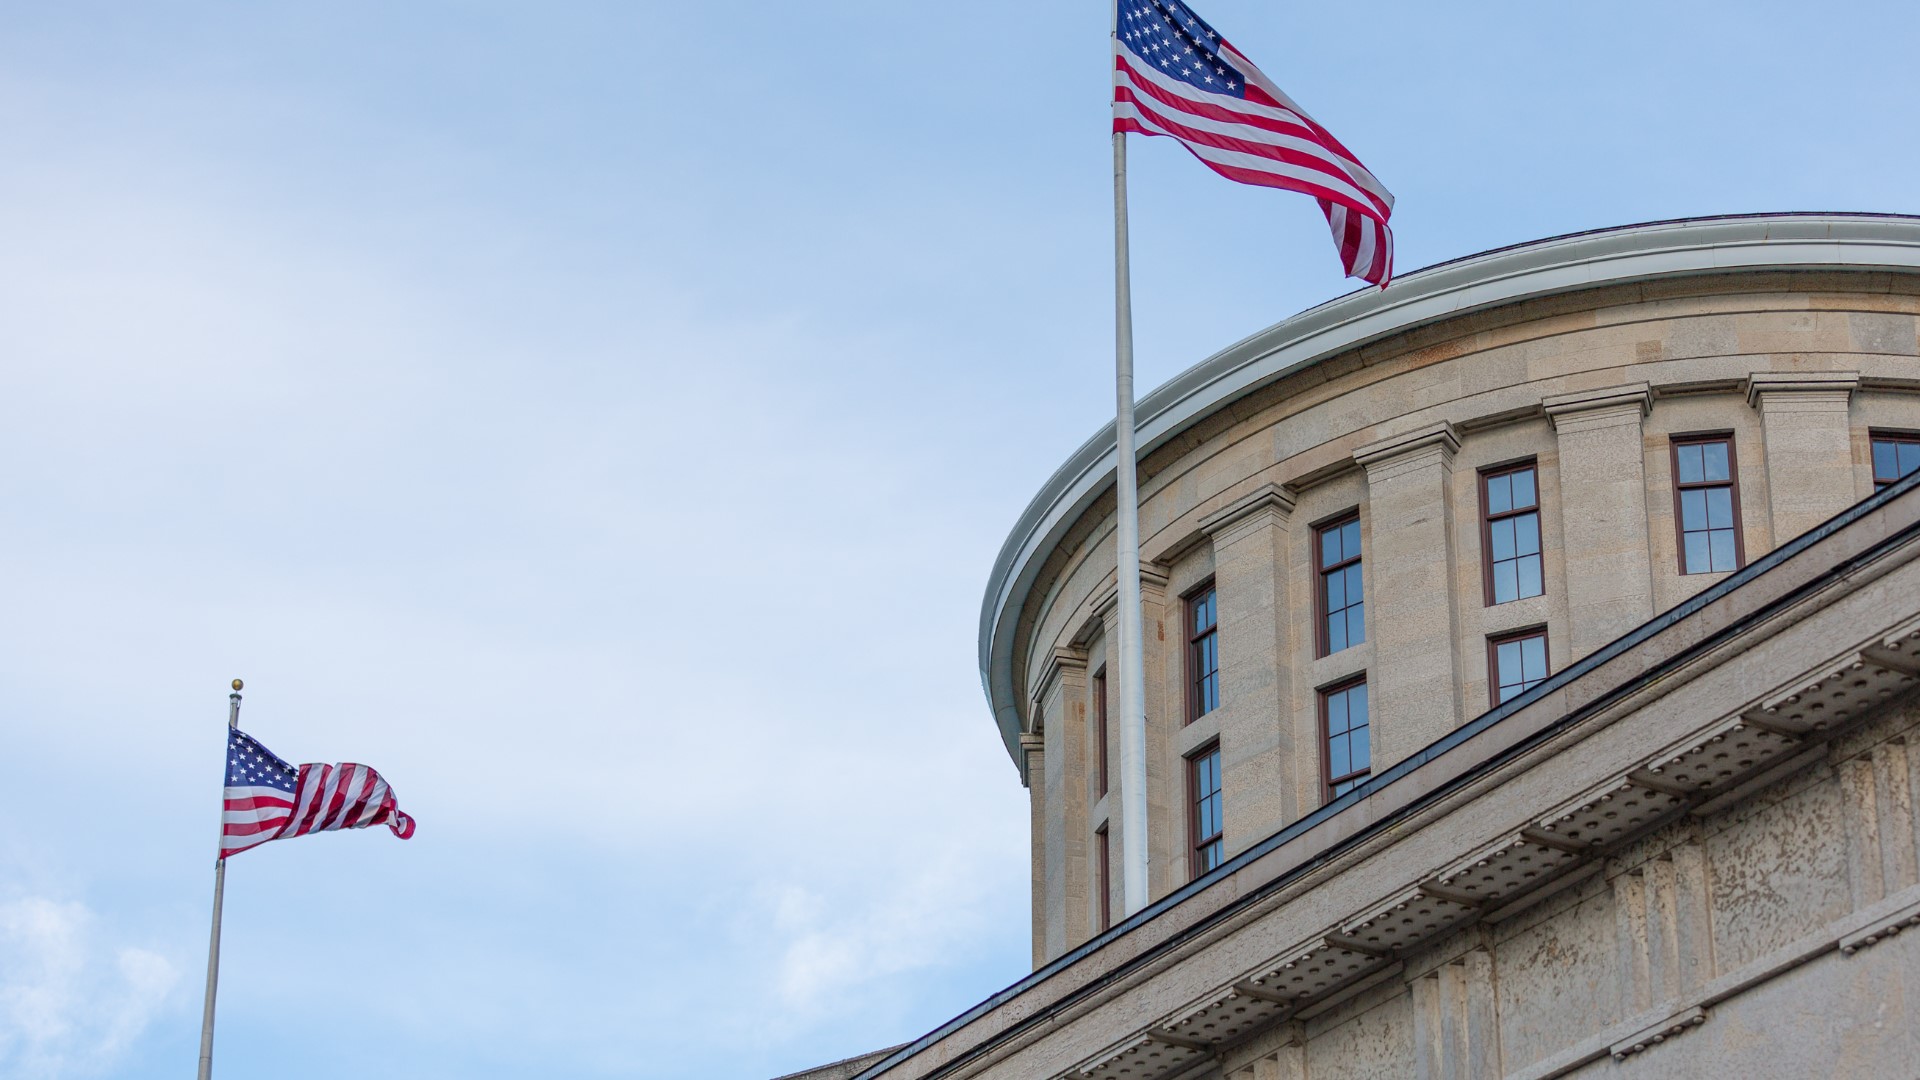 The constitutional amendment moves to the signature-gathering phase after the Ohio Ballot Board confirmed the petition language contains only one proposed amendment.